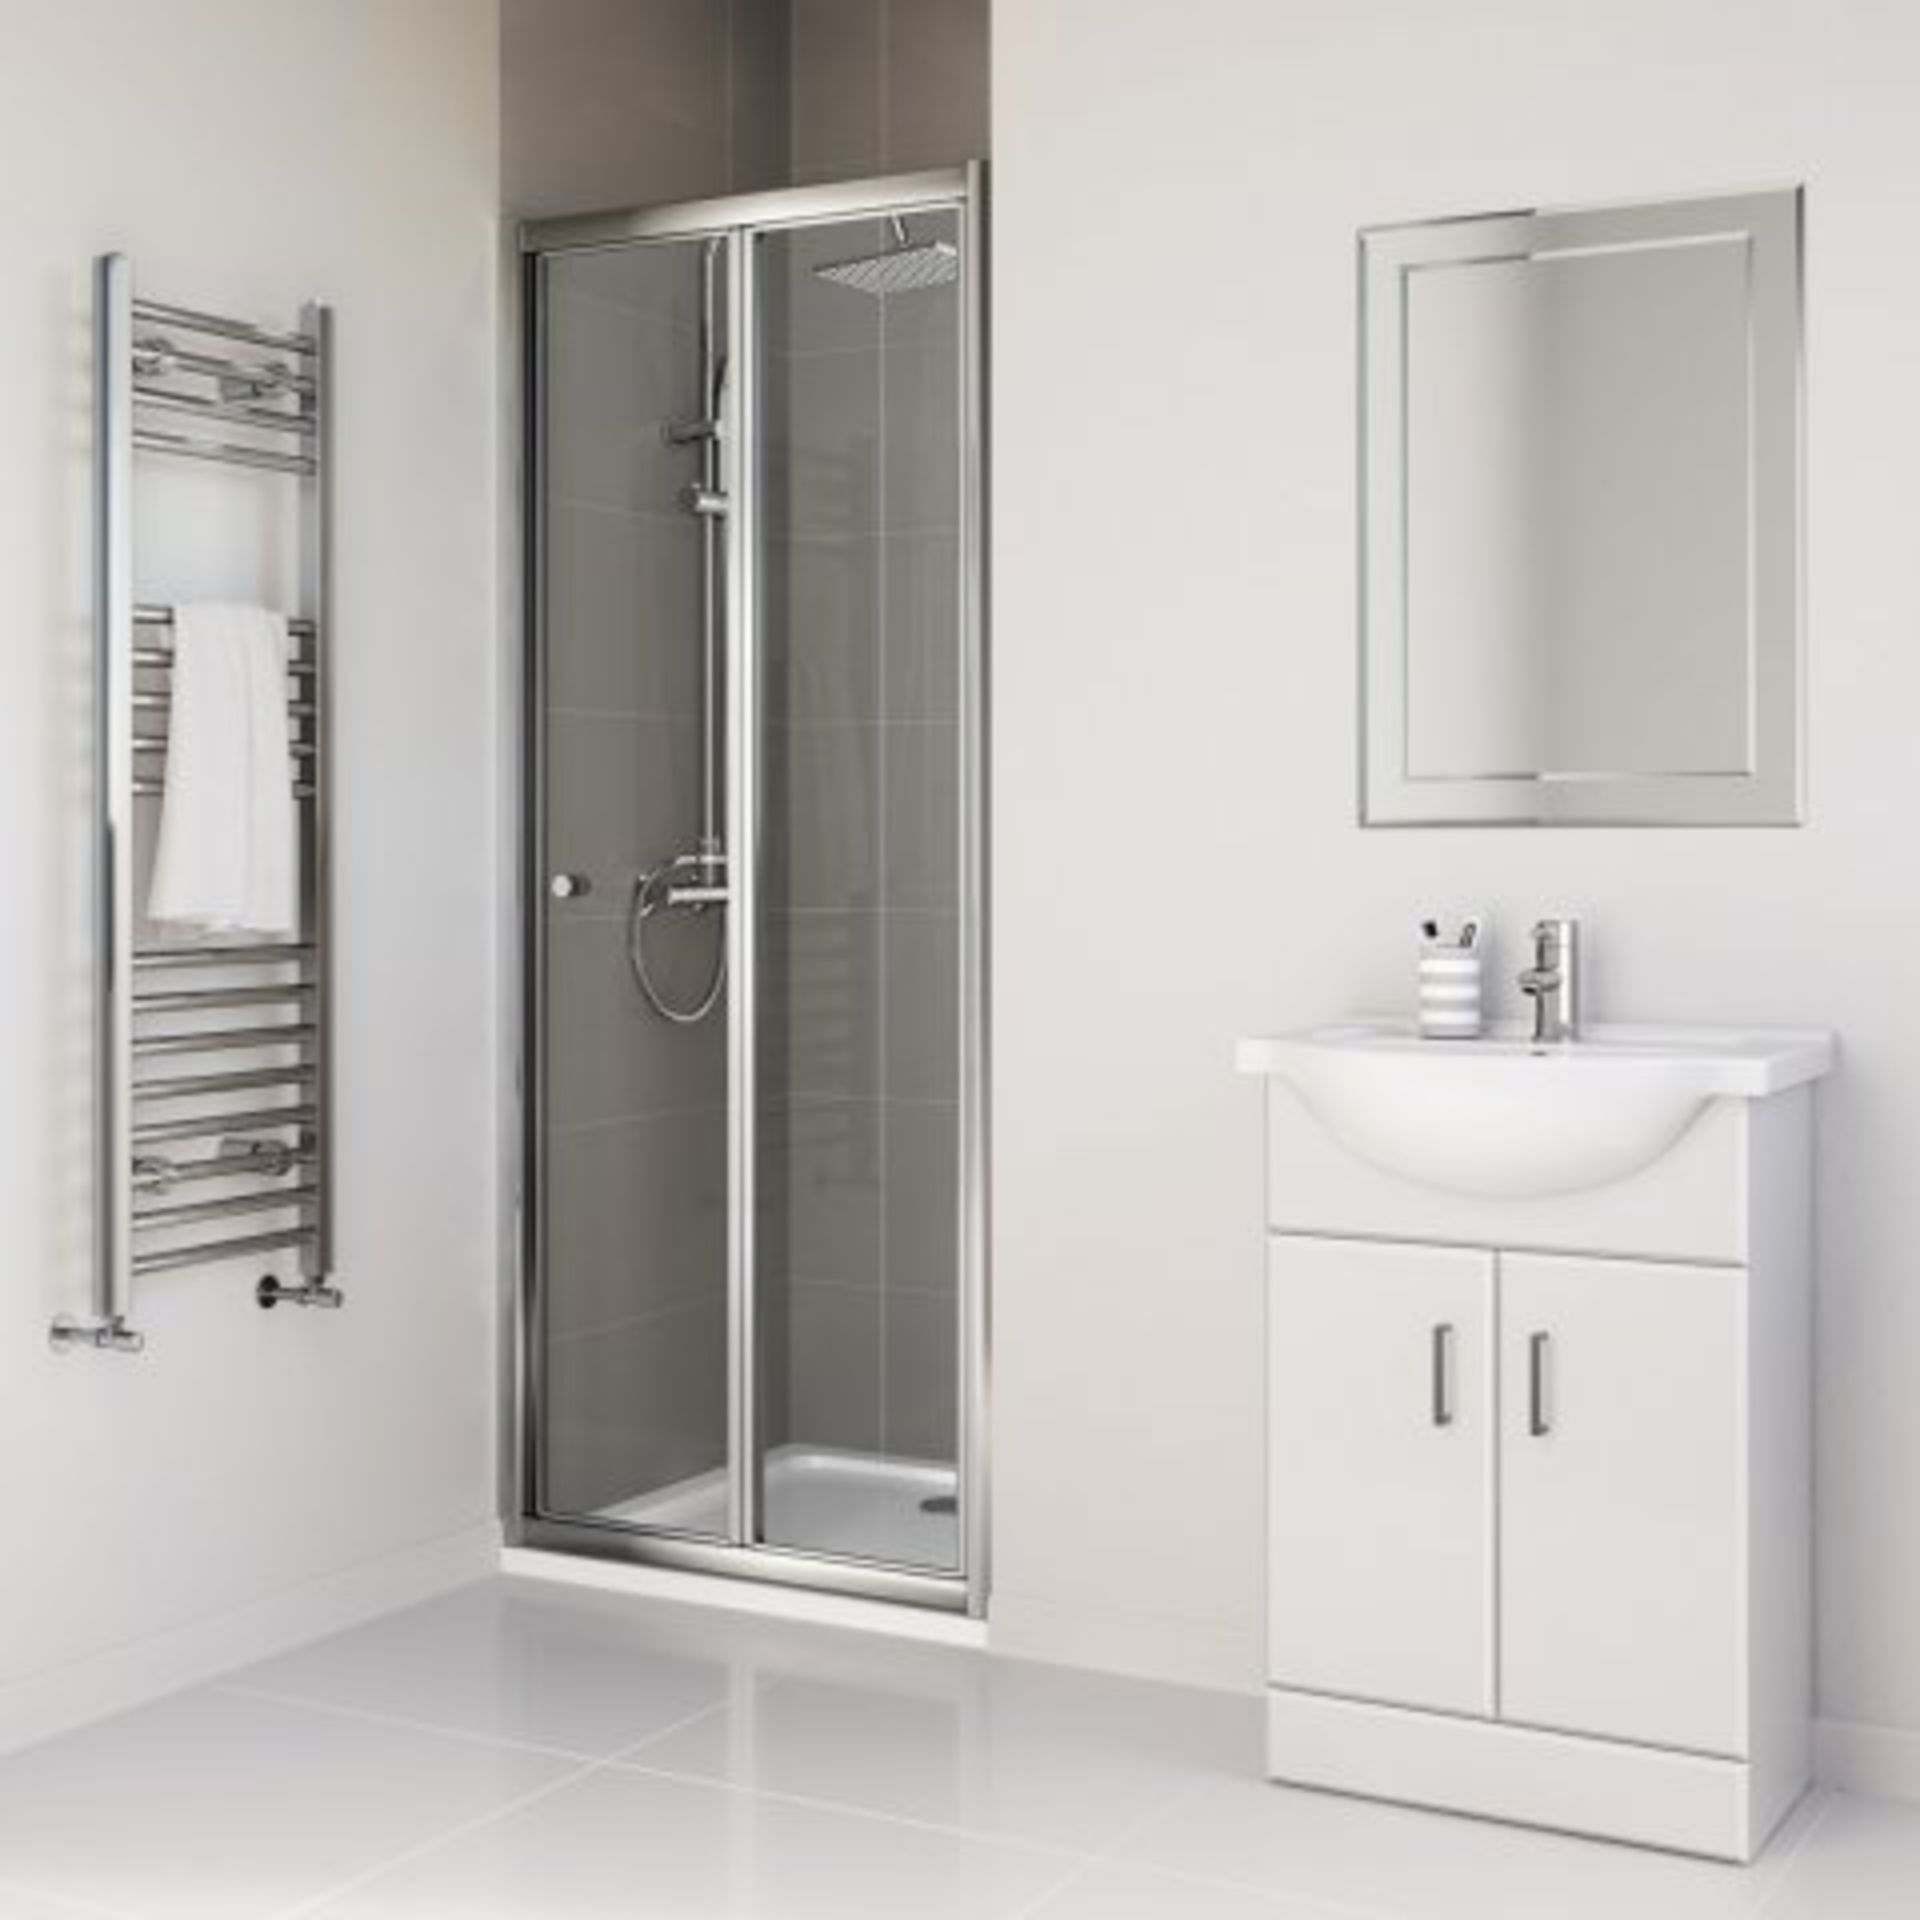 (Z65) 760mm - Elements Bi Fold Shower Door Do you have an awkward nook or a tricky recess in your - Image 3 of 5